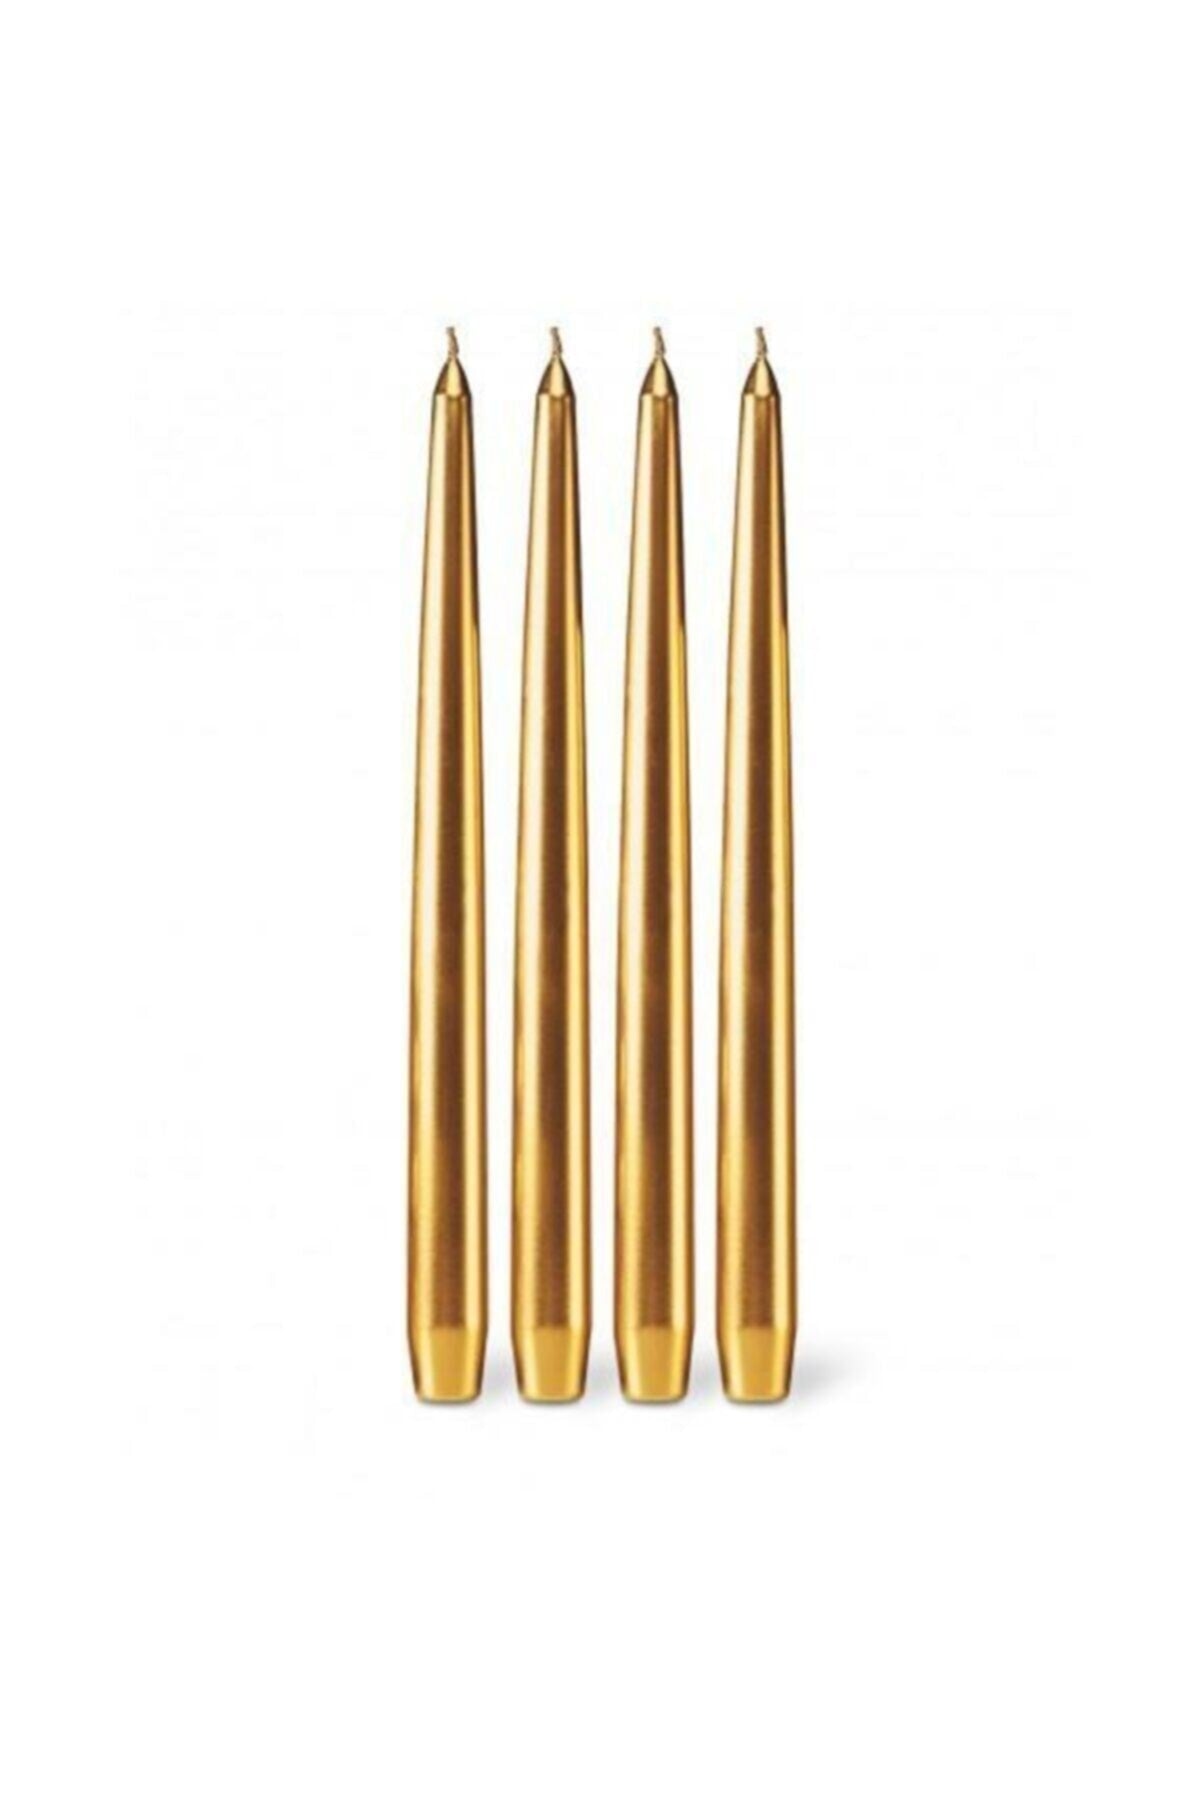 10 metallic gold color conical candlestick candle